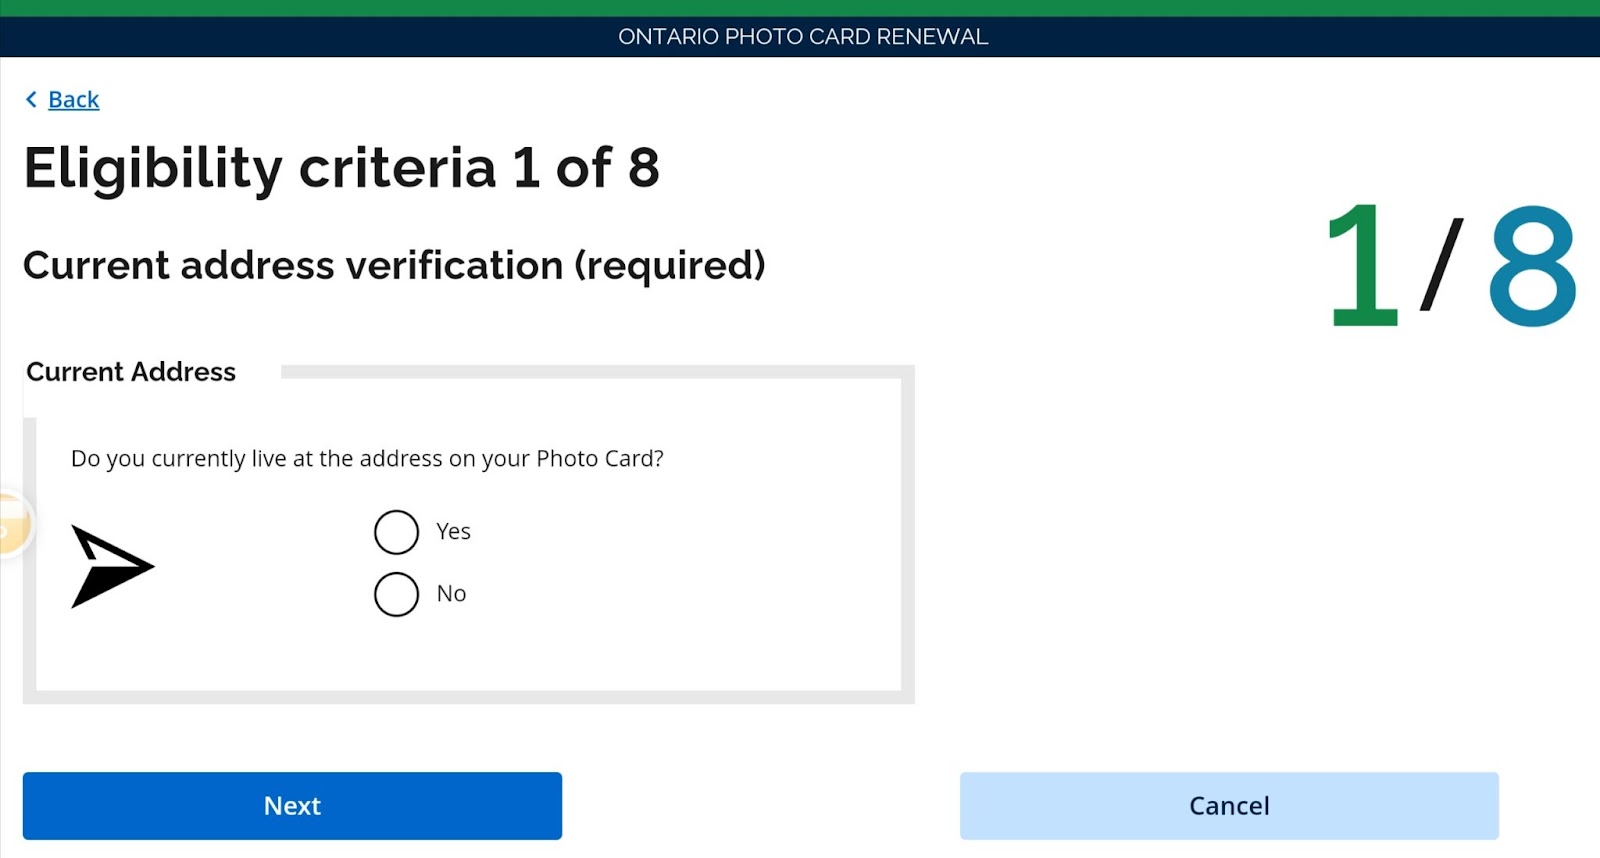 renew process for ontario photo card
